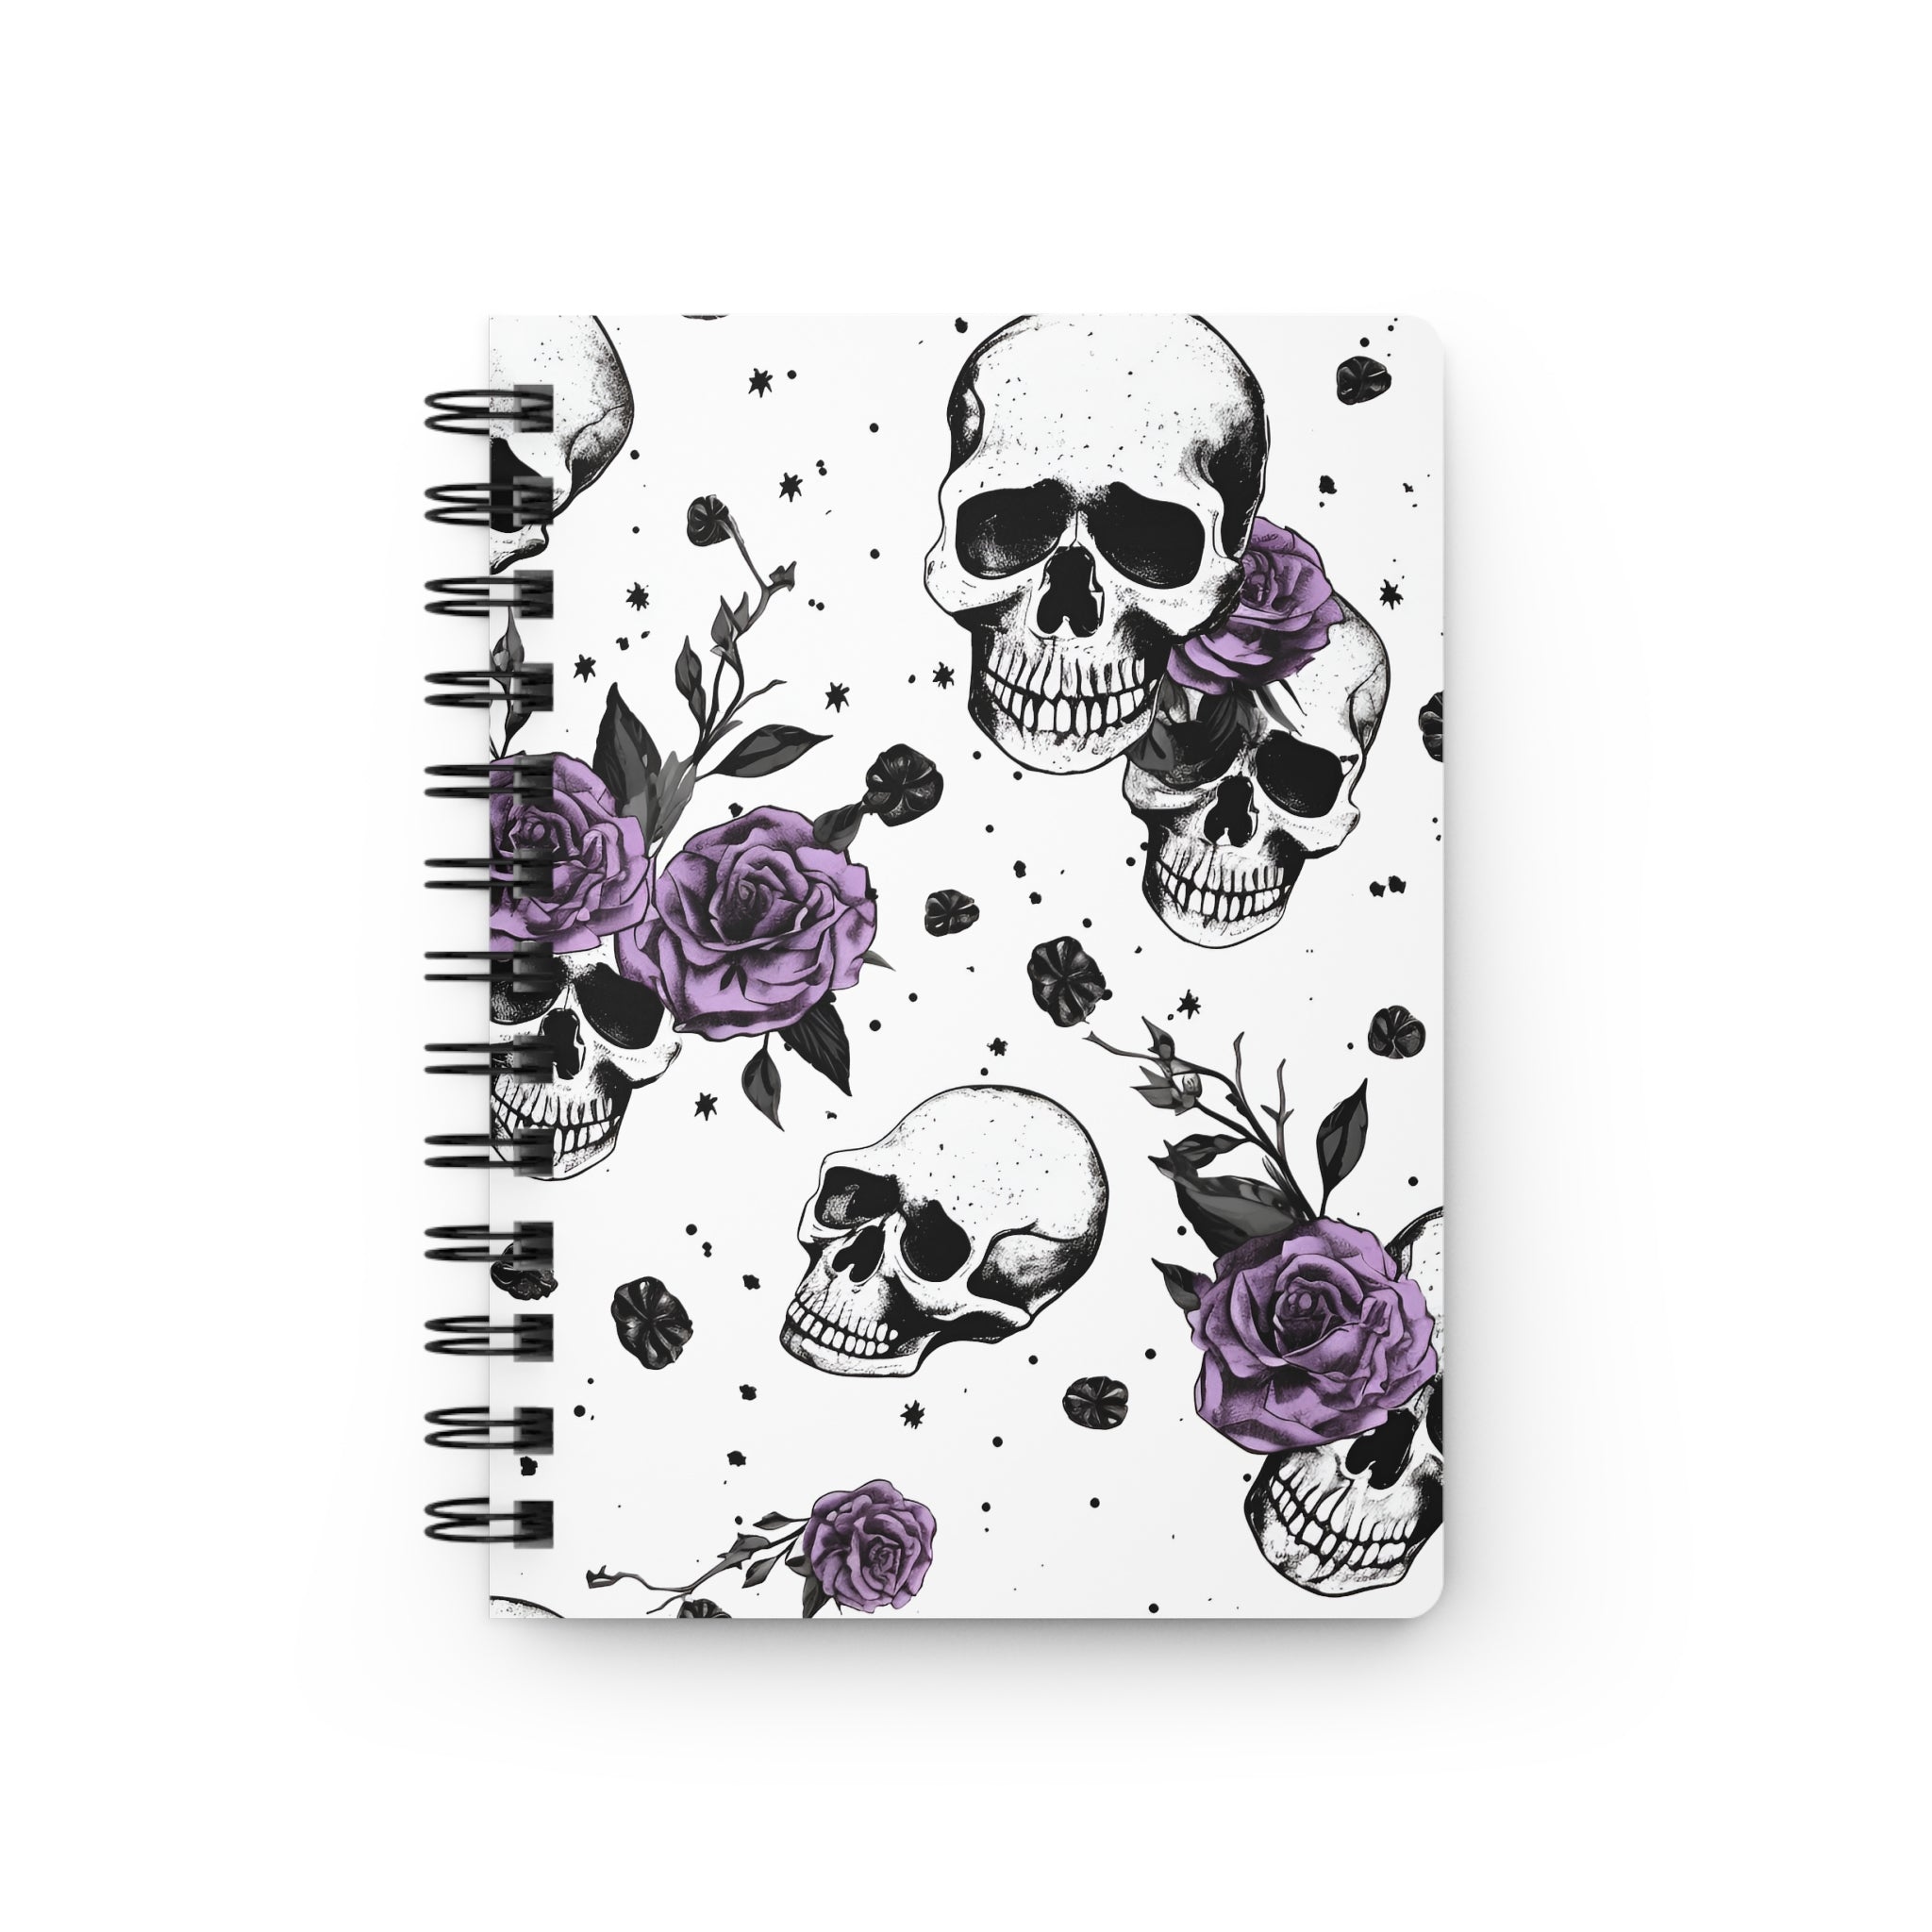 Eternally Yours Skull Lined Notebook, Gothic Violet Rose Spiral Lined 5 x 7 inch